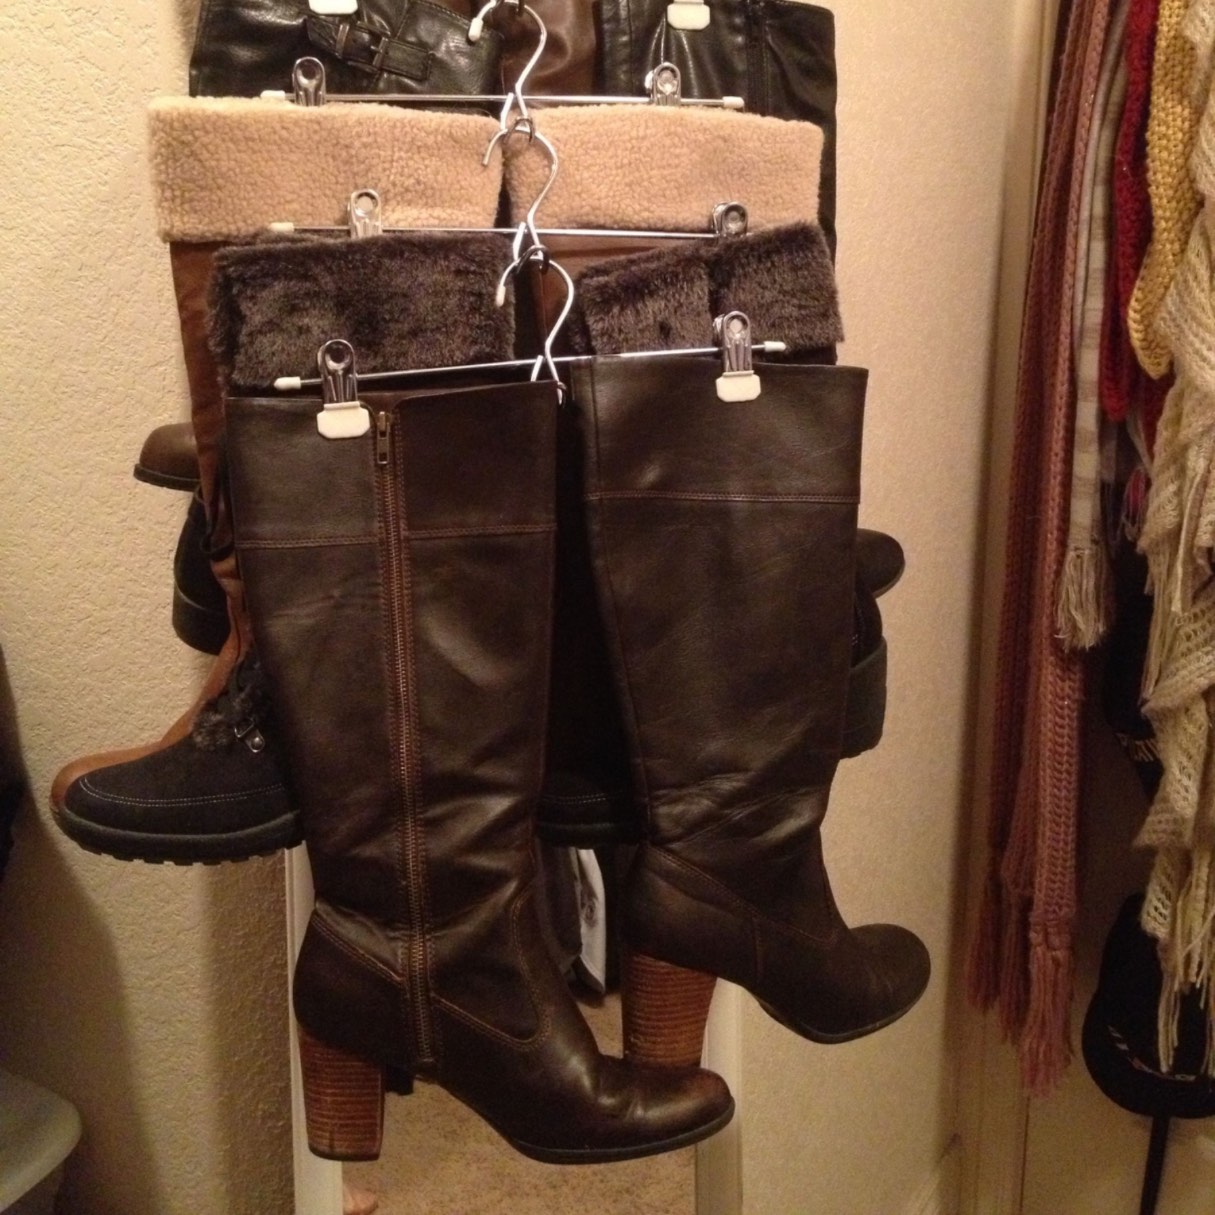 How To Store Long Boots